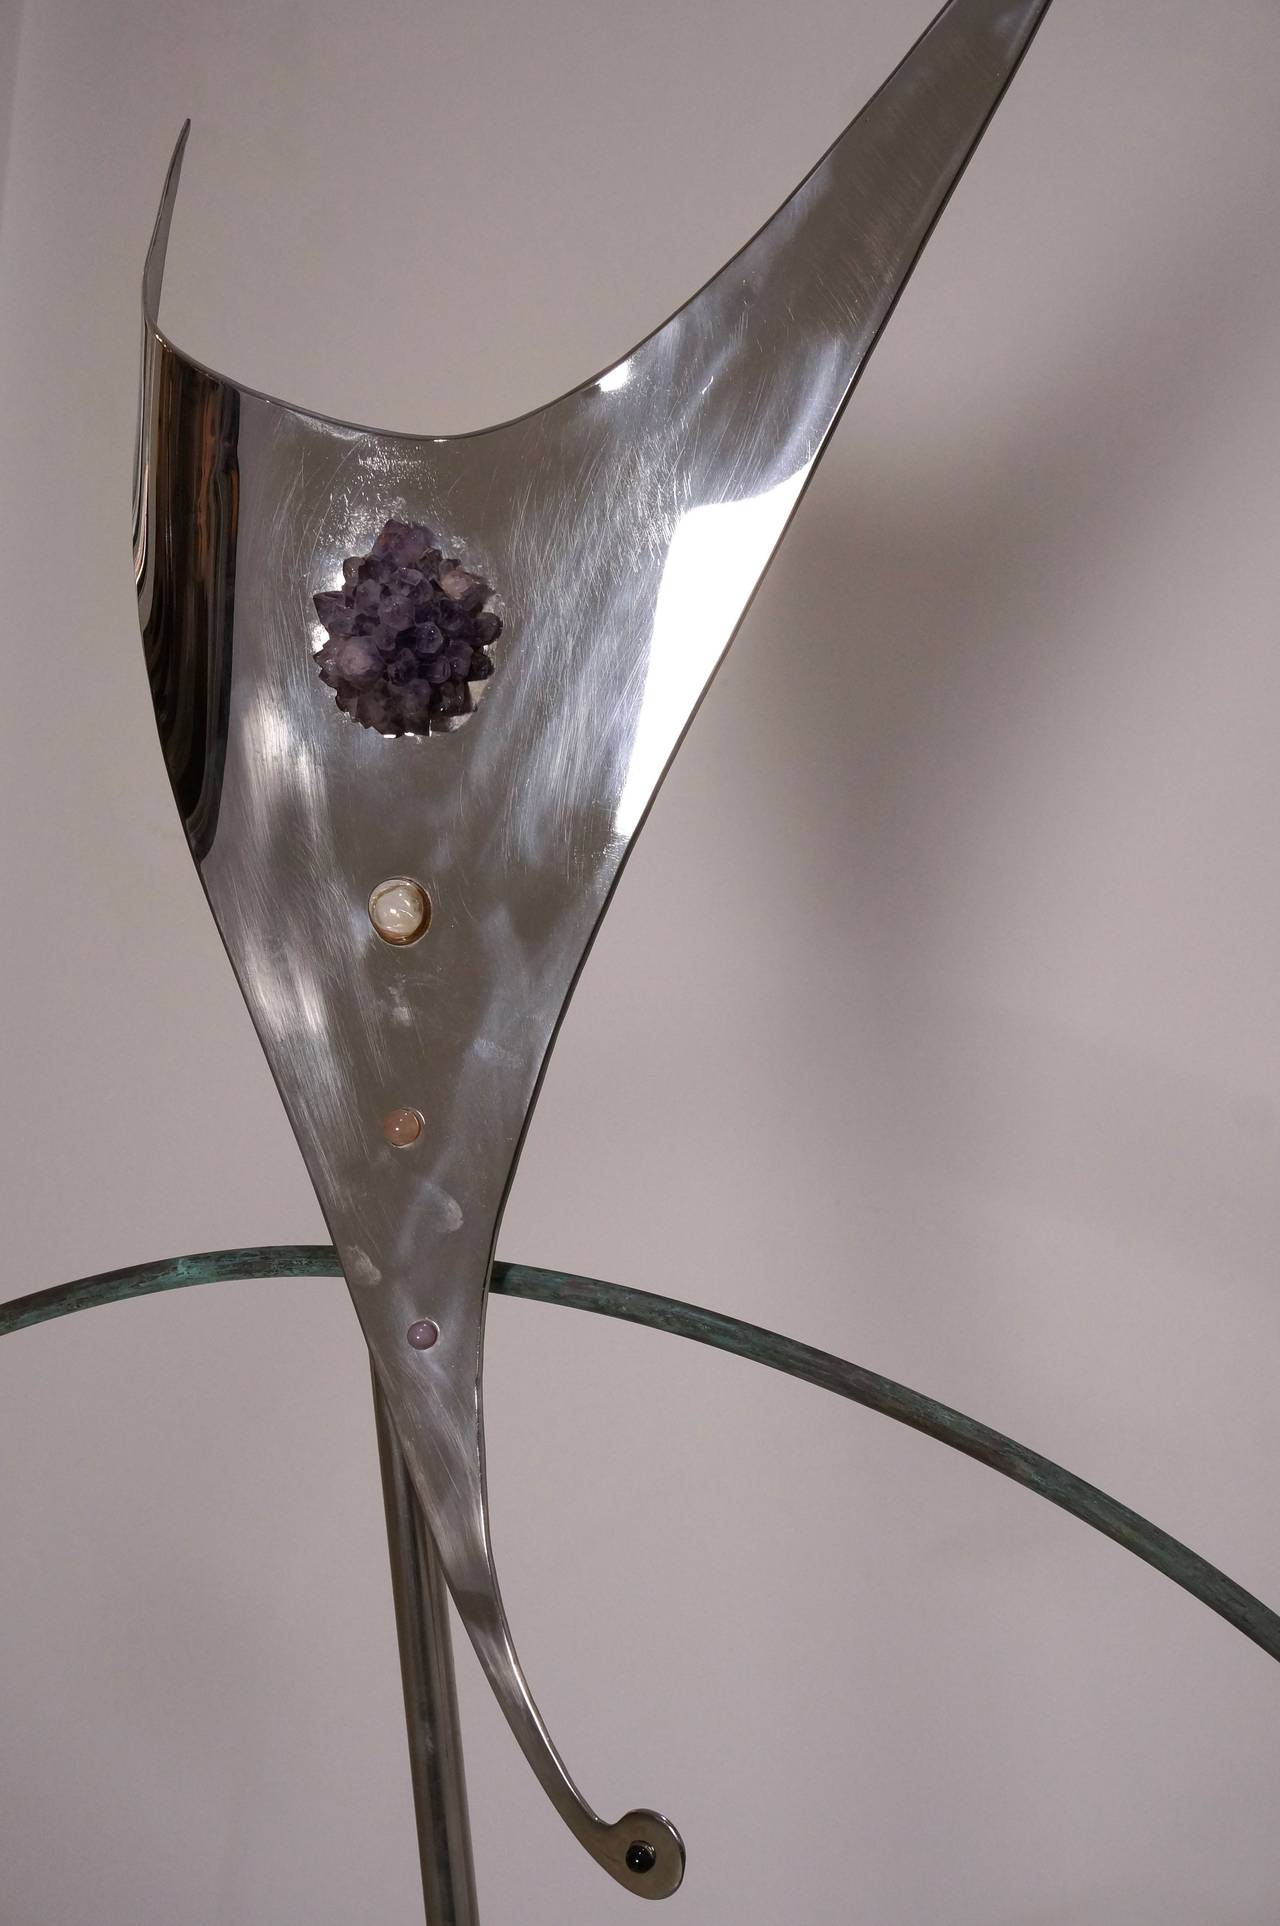 This amazing illuminated sculpture is made of stainless steel, copper, amethyst, rose quartz and molded glass. The free-form has a graceful presence and elegance. 

Note: The piece requires one Edison based bulb.

